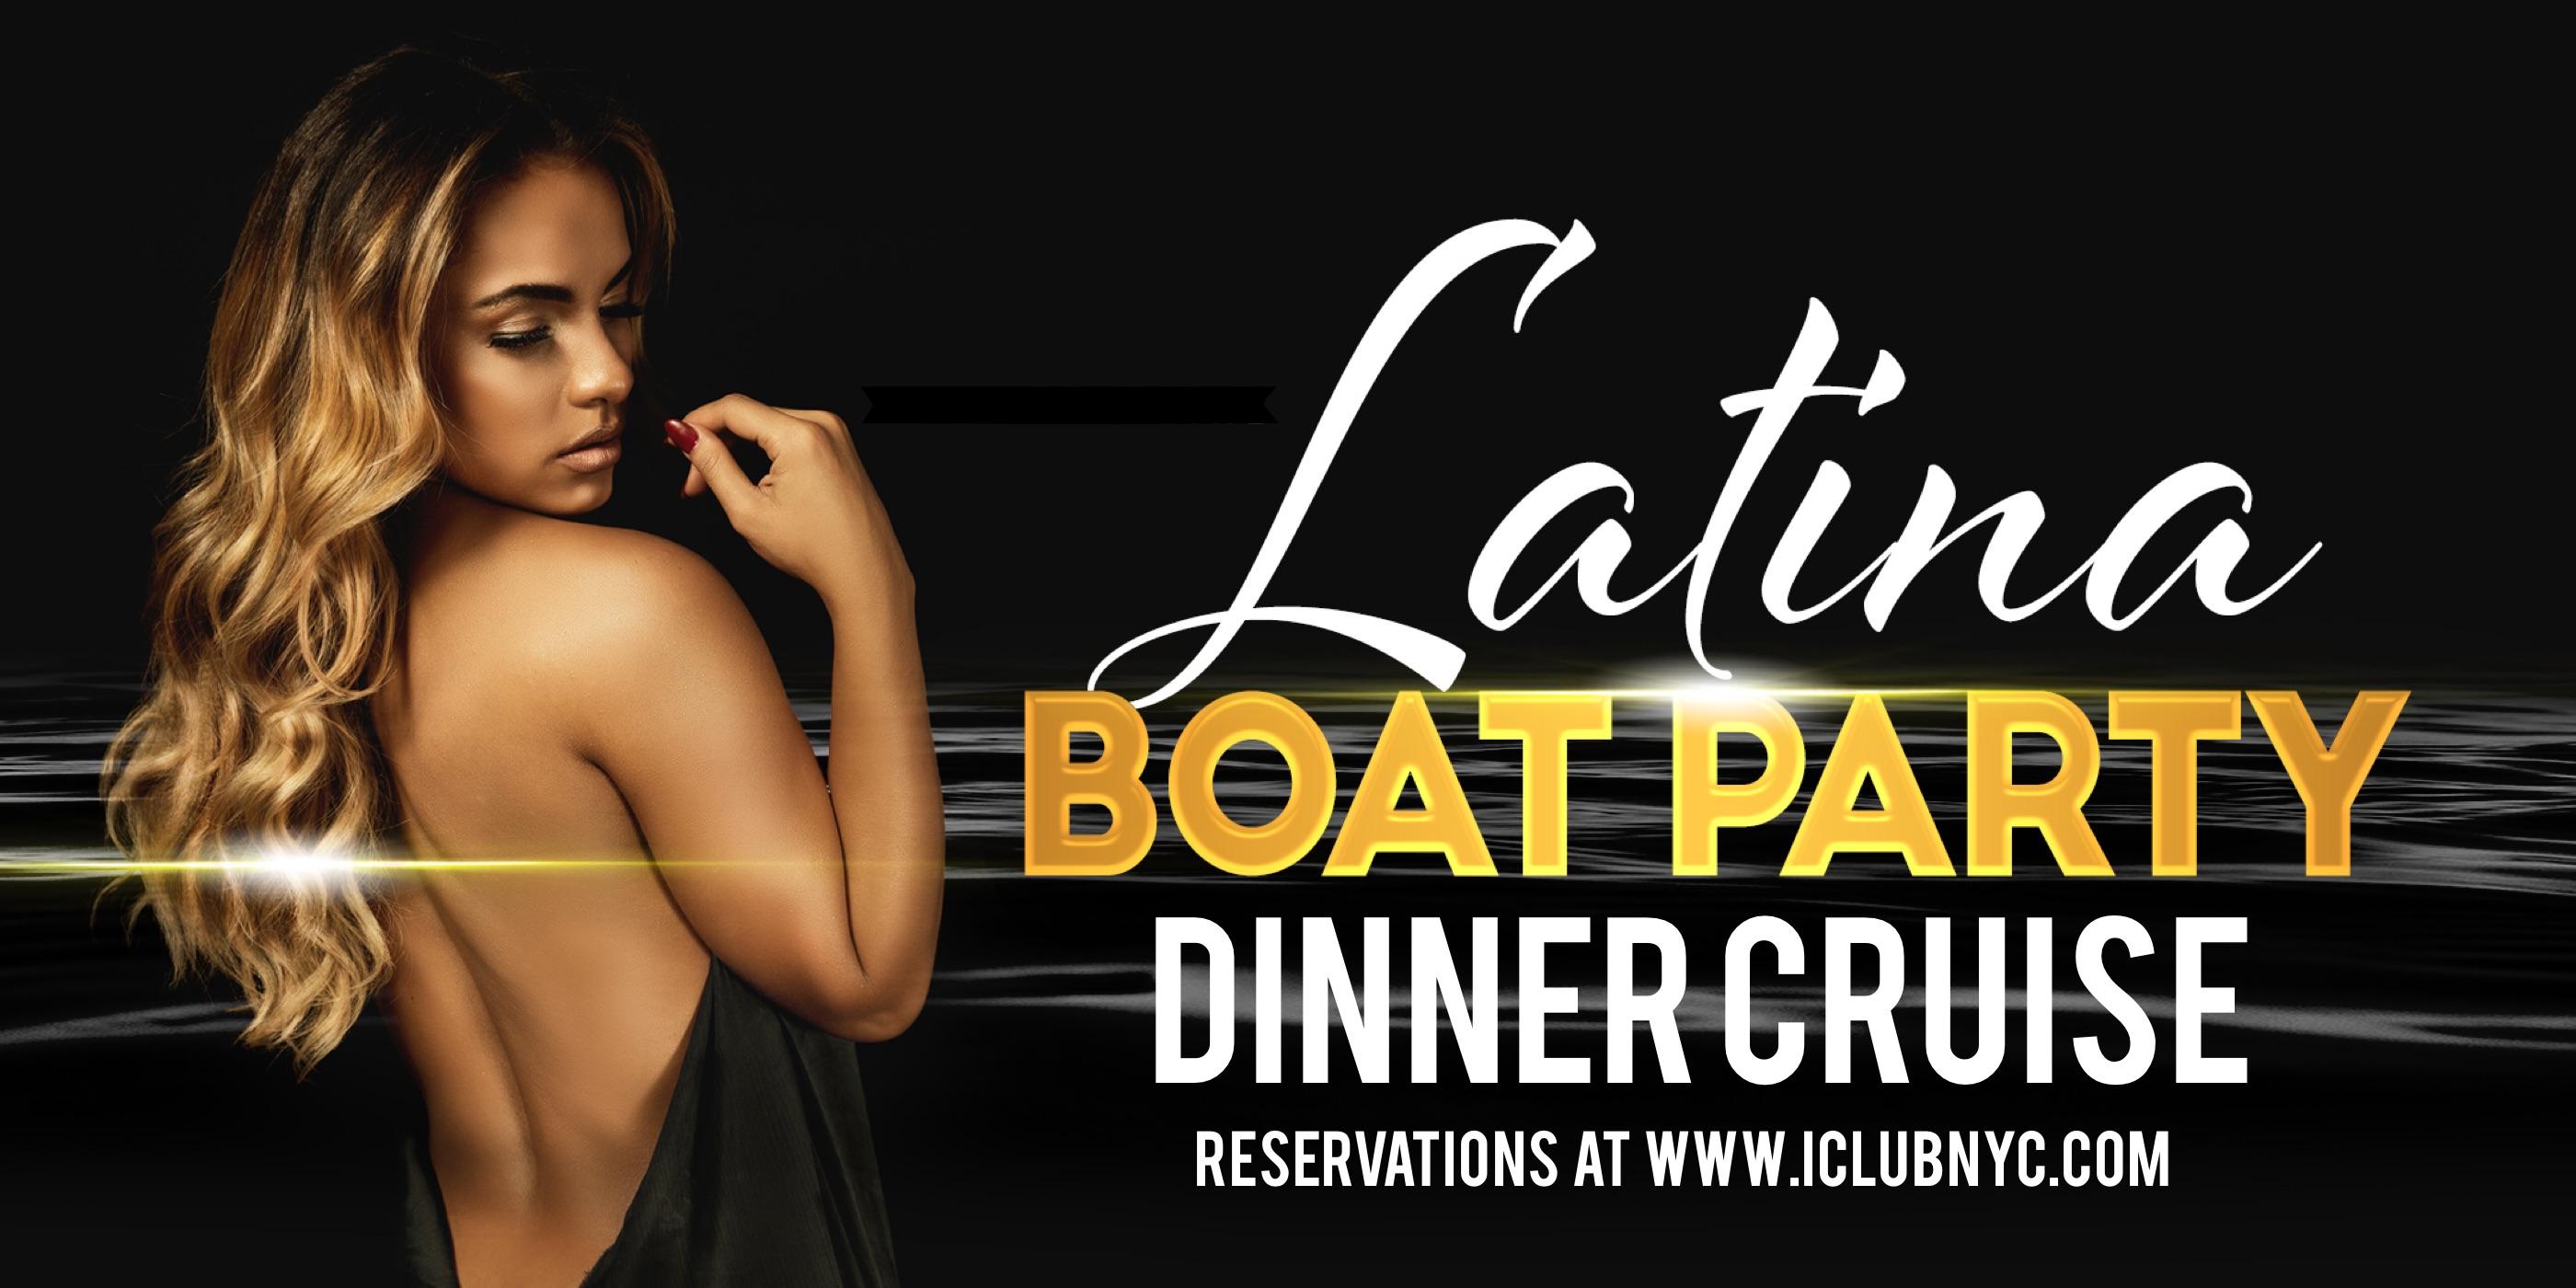 #1 LATIN DINNER CRUISE BOAT PARTY | SENSATION YACHT NYC